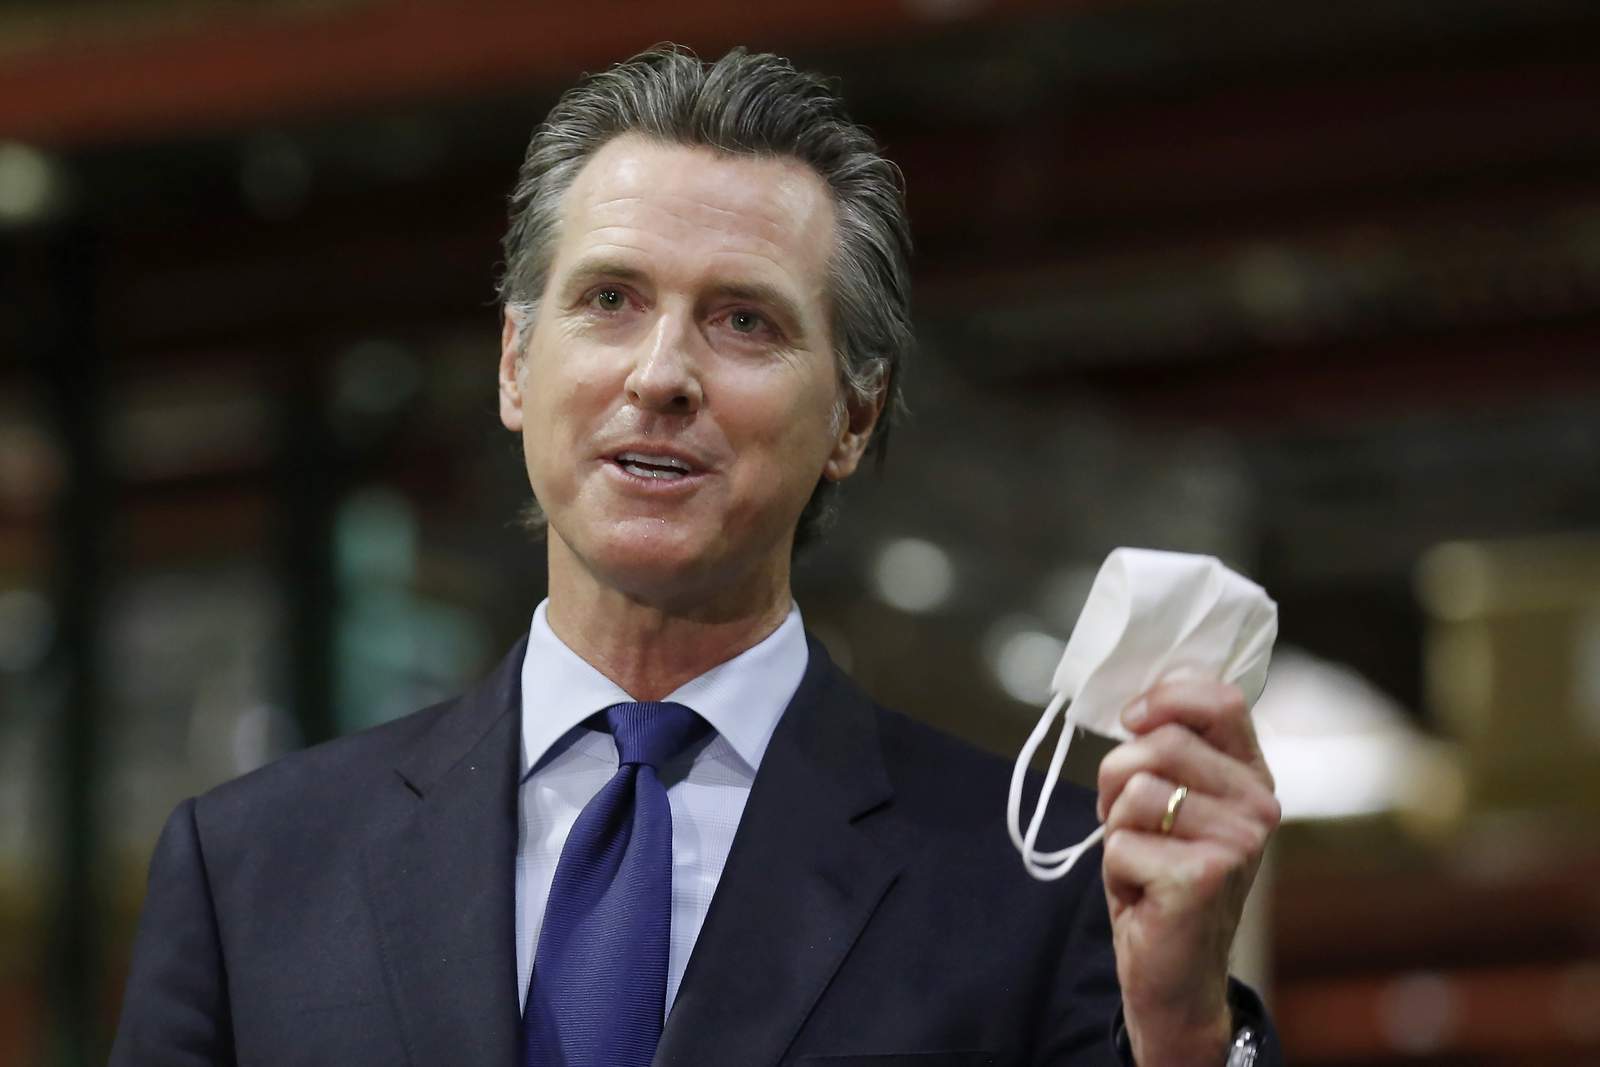 The Latest: California governor tests negative for virus